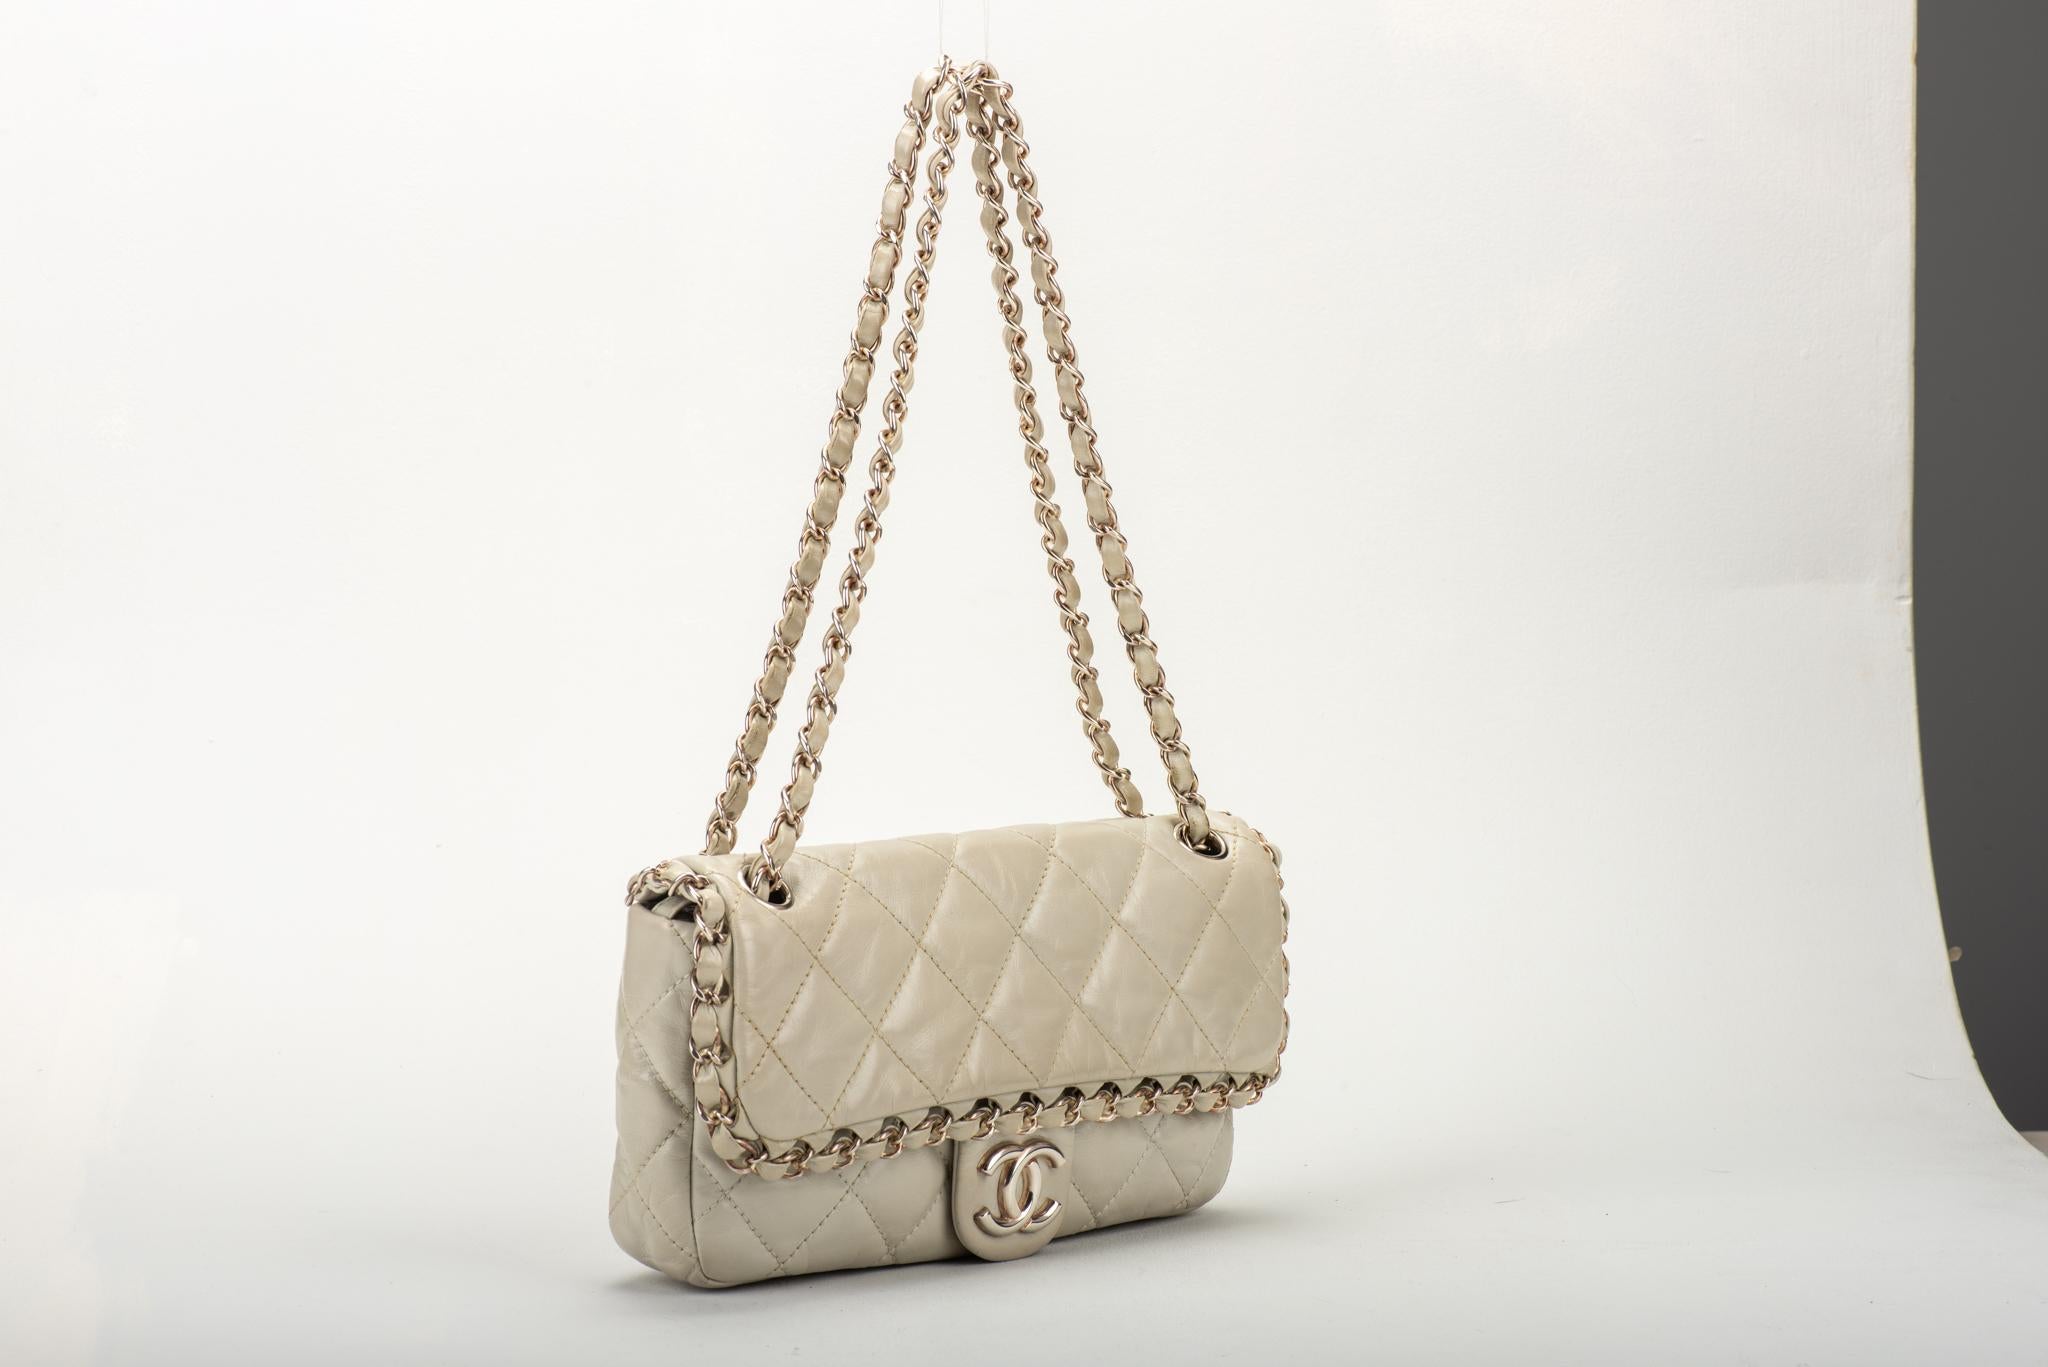  Chanel ice white distressed shiny leather silver chain detail evening bag. Very good condition.  Shoulder drop 9.5